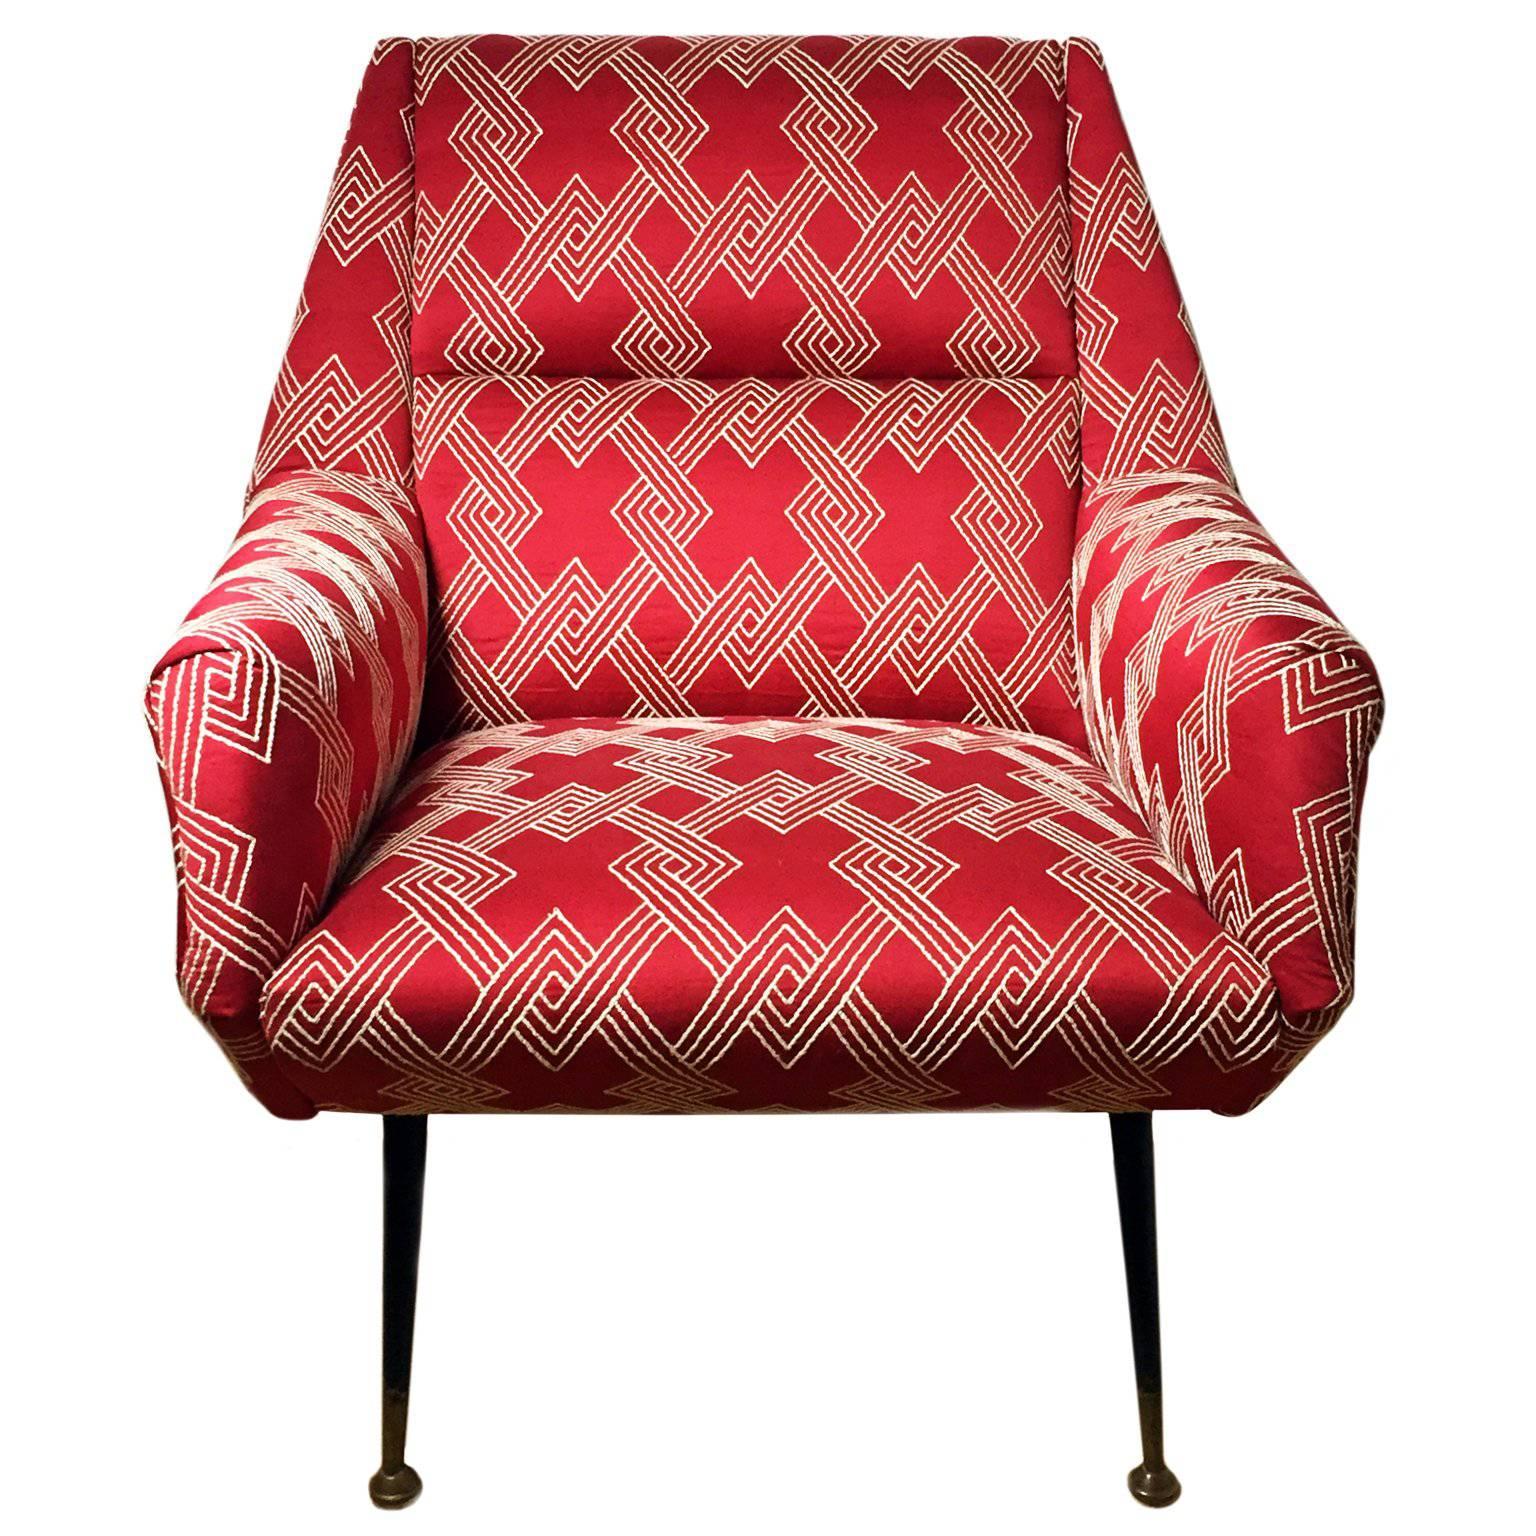 Mid-Century Italian Angled Back Club Chair in Red and White Geometric Fabric